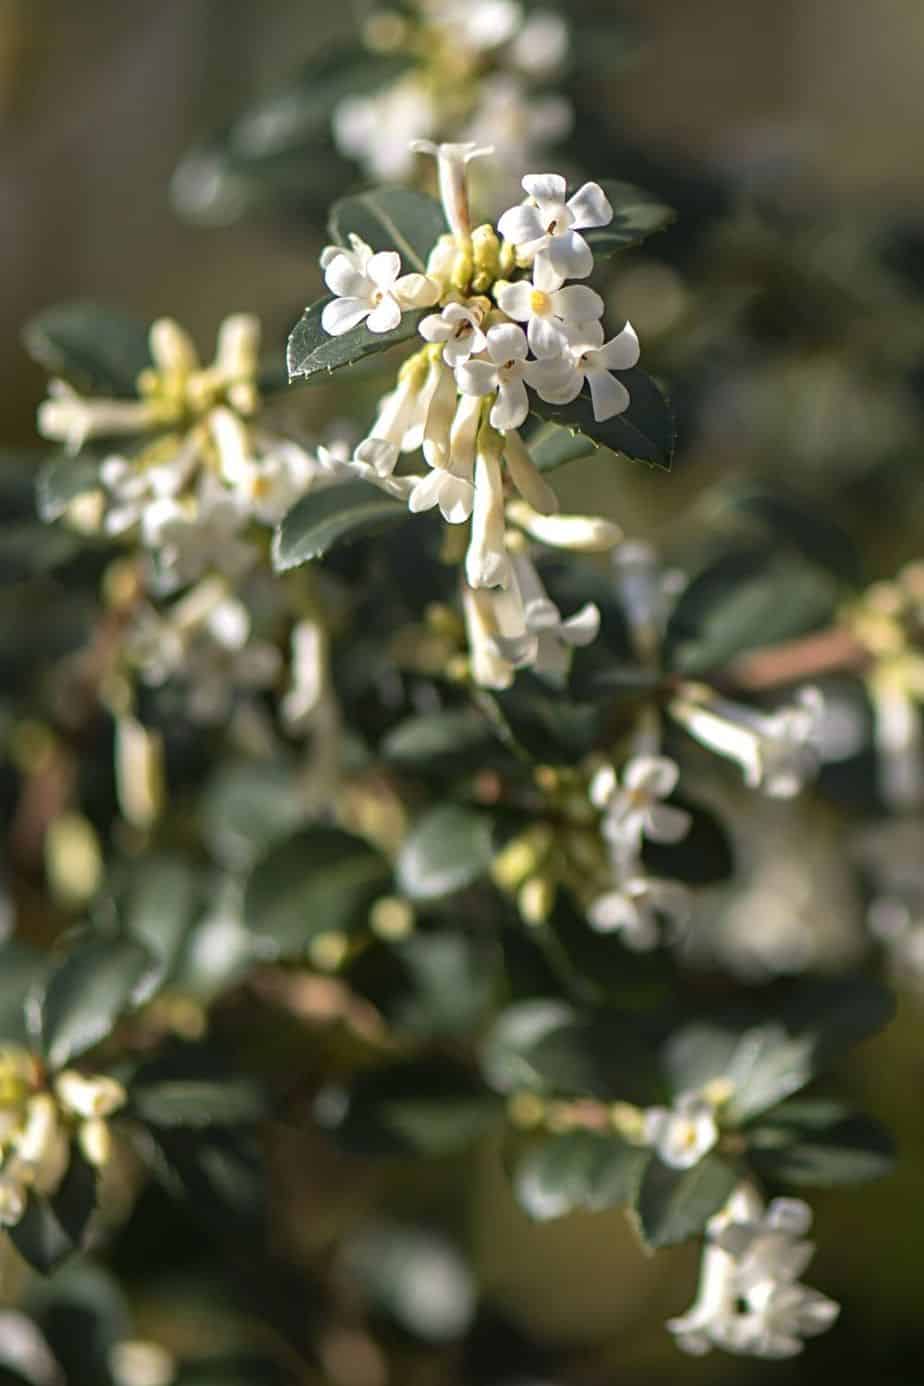 Osmanthus Delavayi thrives in minimal sunlight during the daytime in the north-facing side of the house